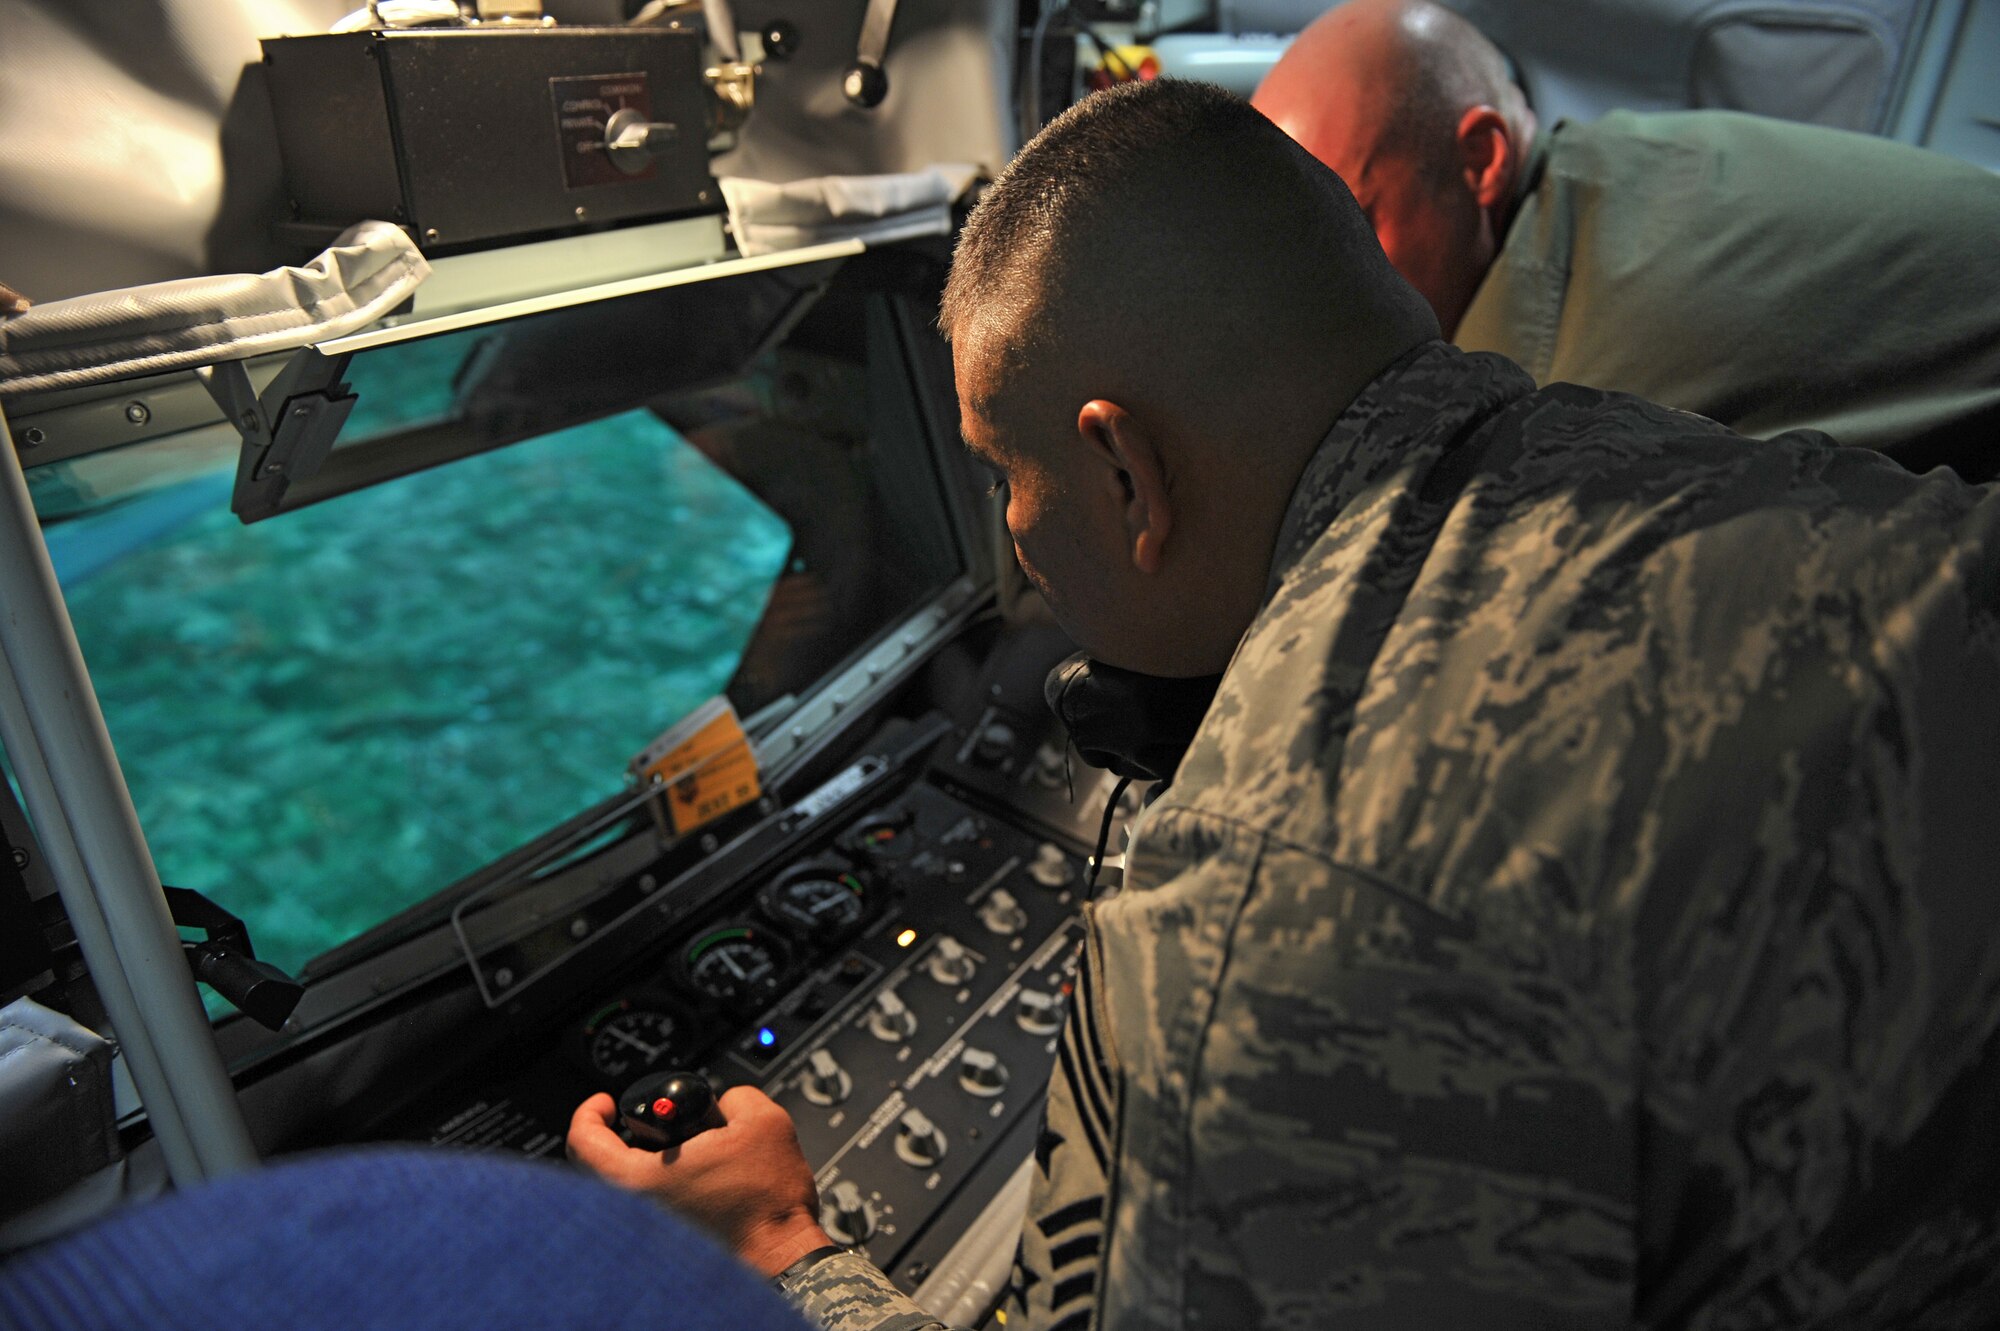 ALTUS AIR FORCE BASE, Okla. – U.S. Air Force Chief Master Sgt. Gerardo Tapia, command chief of Air Education and Training Command, simulates in-flight refueling from a KC-135 Stratotanker during a visit to the Boom Operator Weapons System Training Simulator Aug. 7, 2014. Tapia was able to get a hands-on look at the 97th Air Mobility Wing’s training mission and its contribution to meeting future warfighter needs. (U.S. Air Force photo by Senior Airman Dillon Davis/Released)